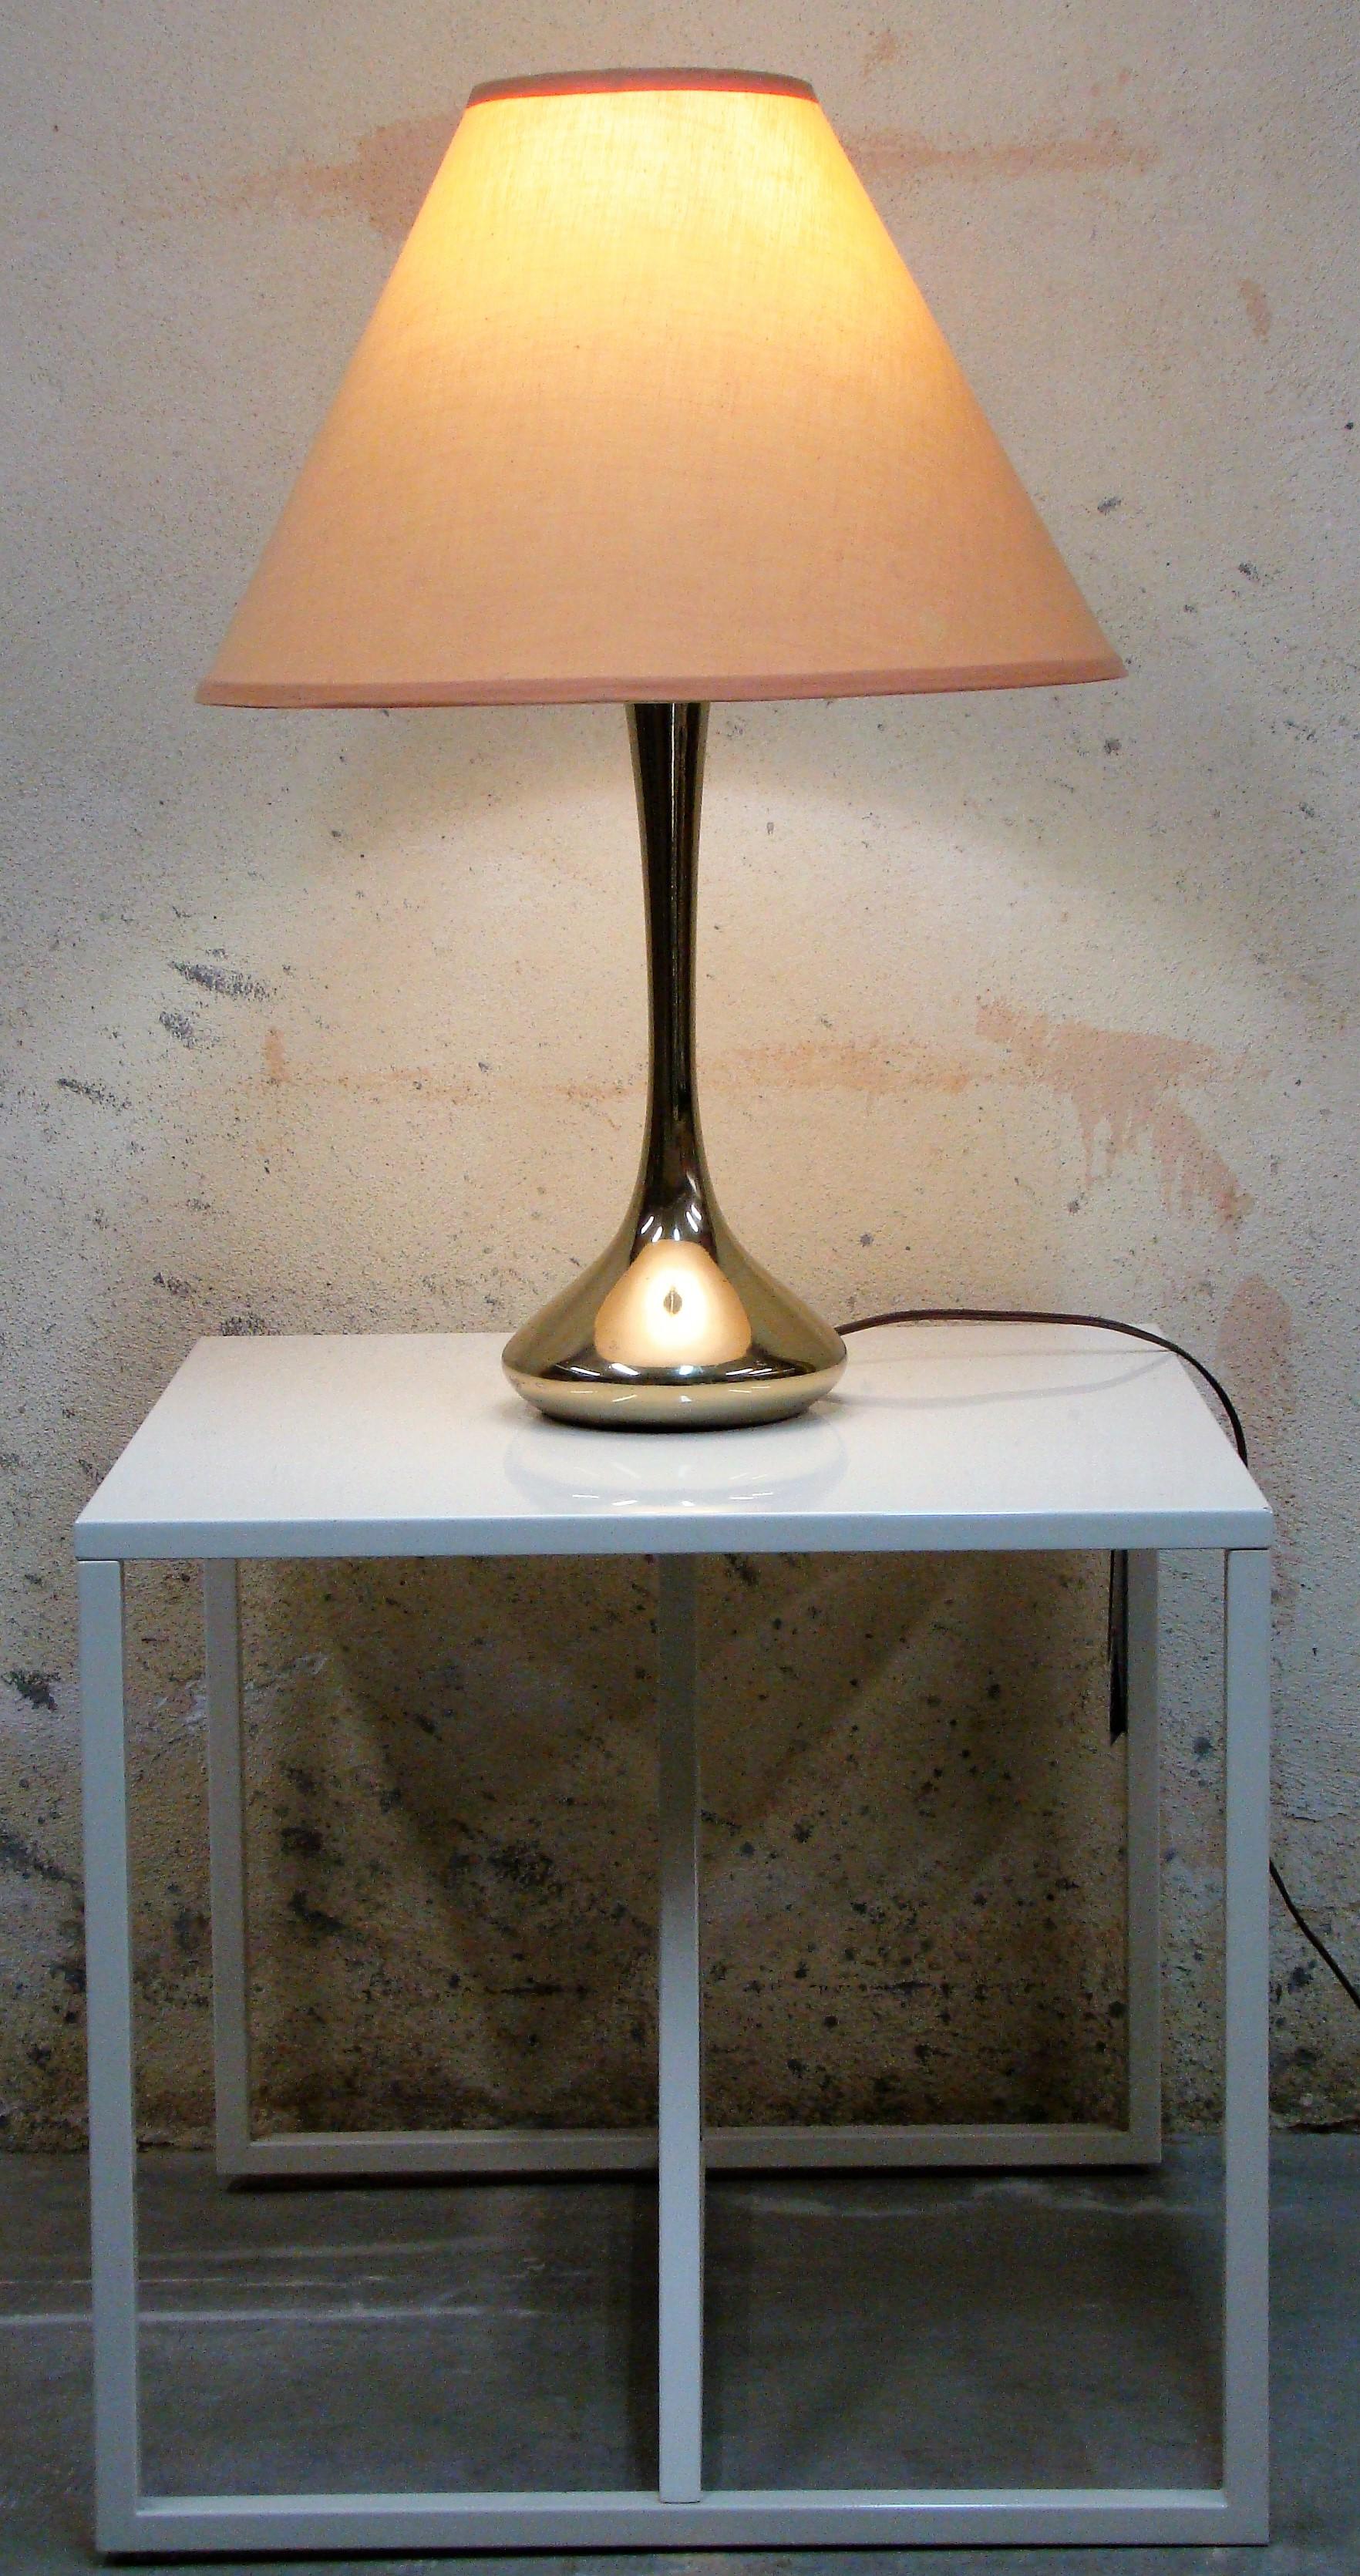 Beautiful brass laurel lamp base (shade not included) widely attributed to architect Gio Ponti. Fluid sculptural form, in Pontis' signature gold tones, is the perfect accent lamp for any Mid-Century Modern decor.

Overall height (24